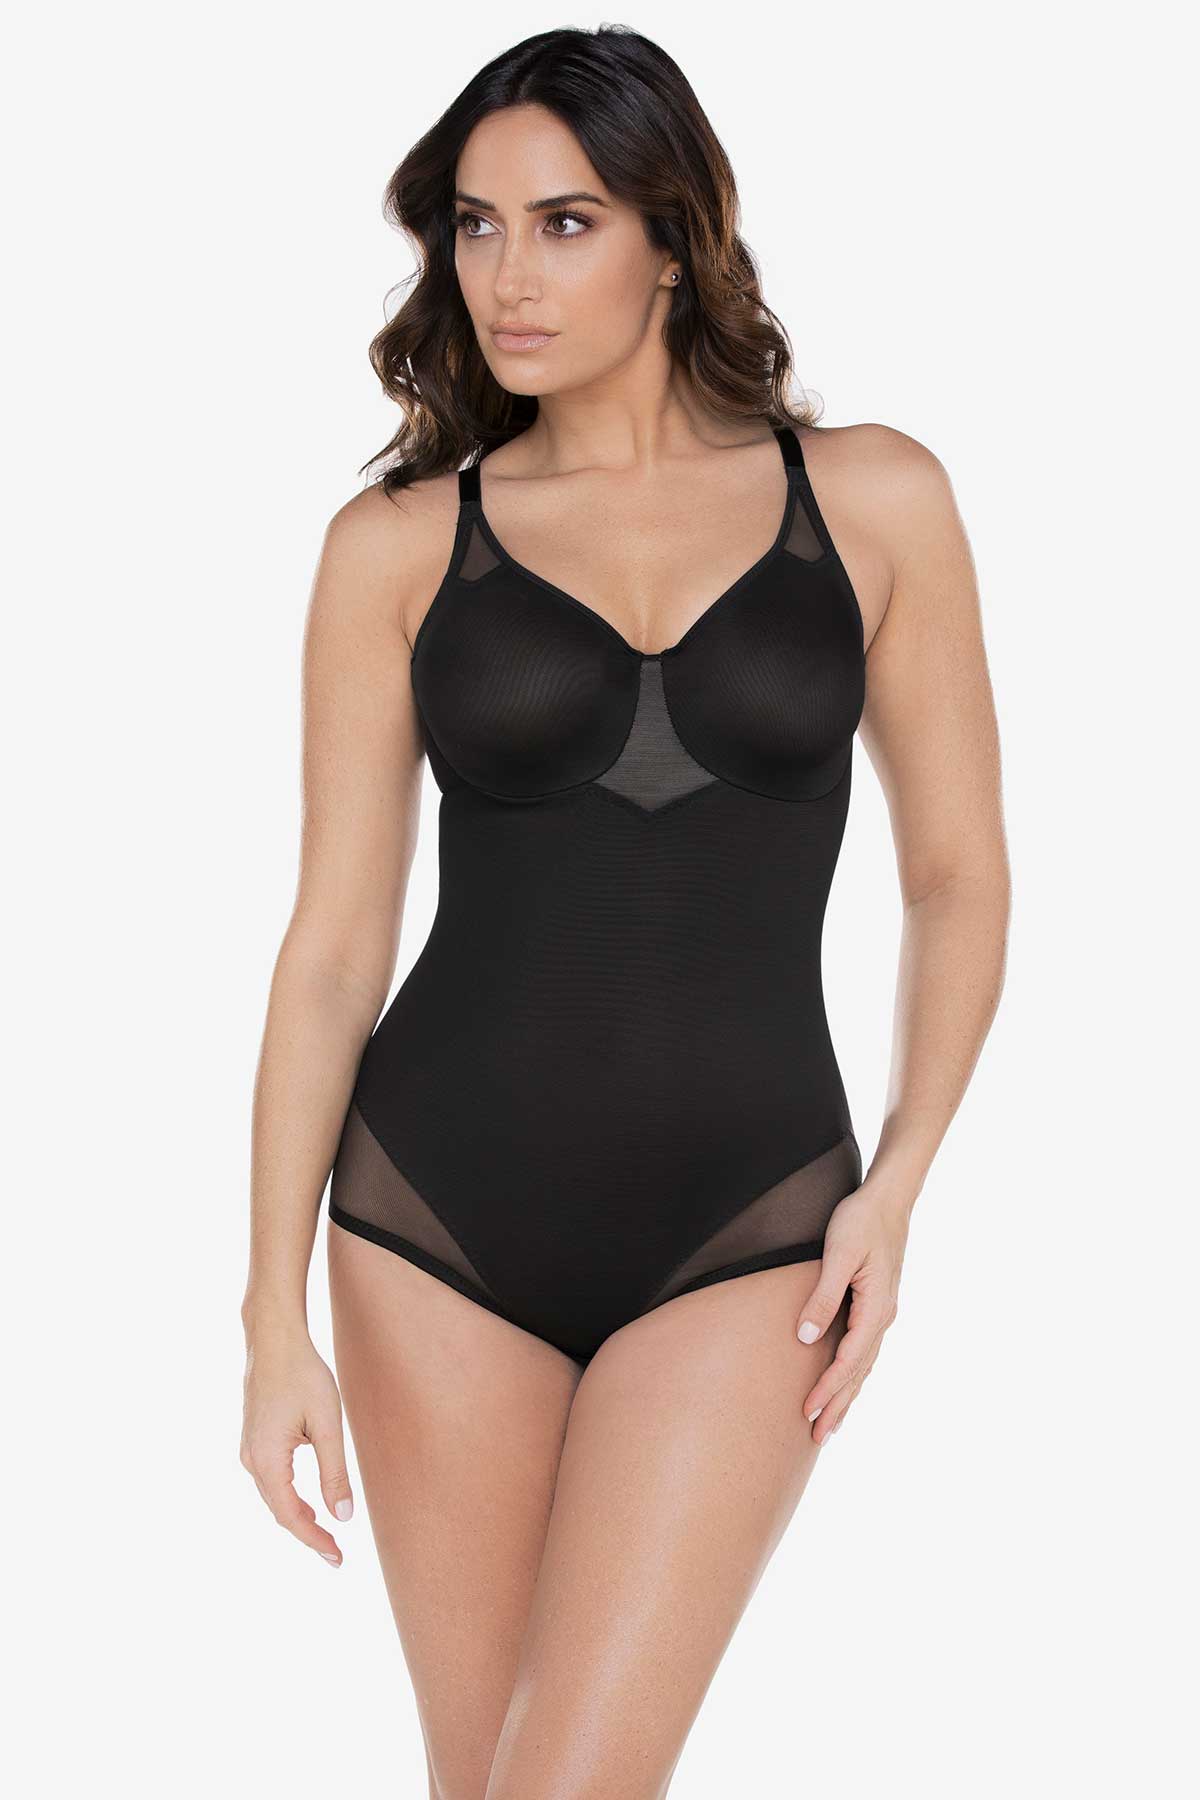 Ambrielle LYCRA® FitSense™ technology Wirefree Body Briefer